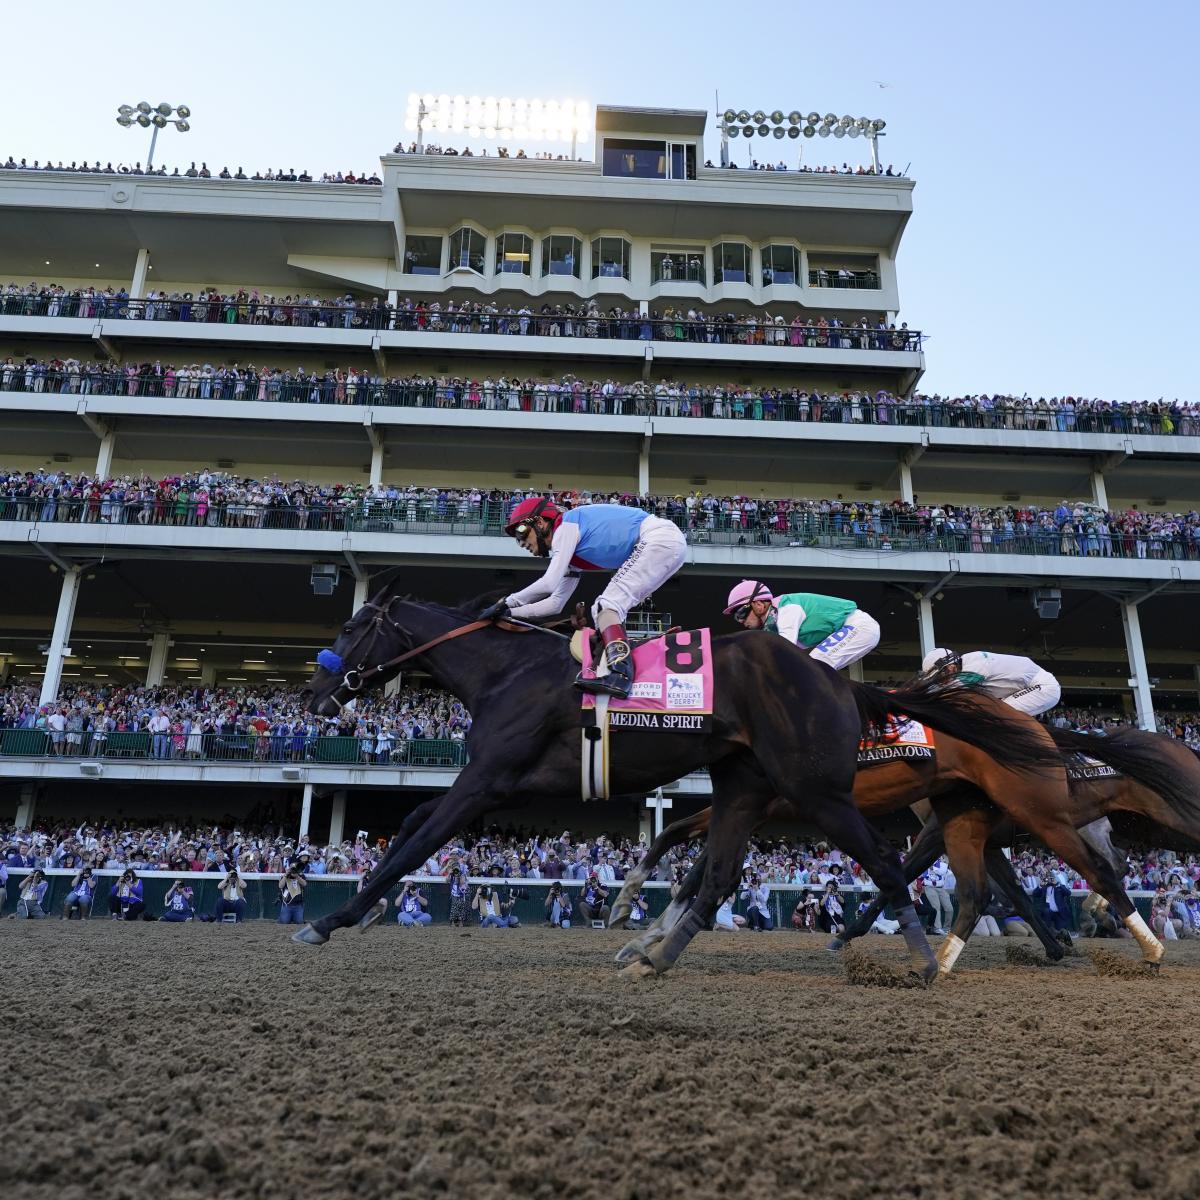 Kentucky Derby 2021 Results, Winner, Payouts and Comments After 147th